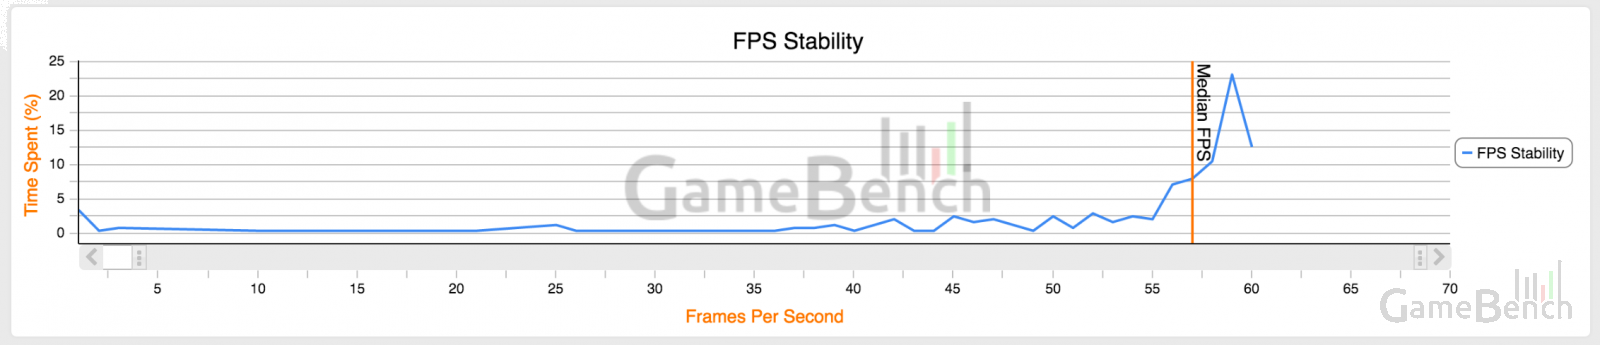 FPS Stability